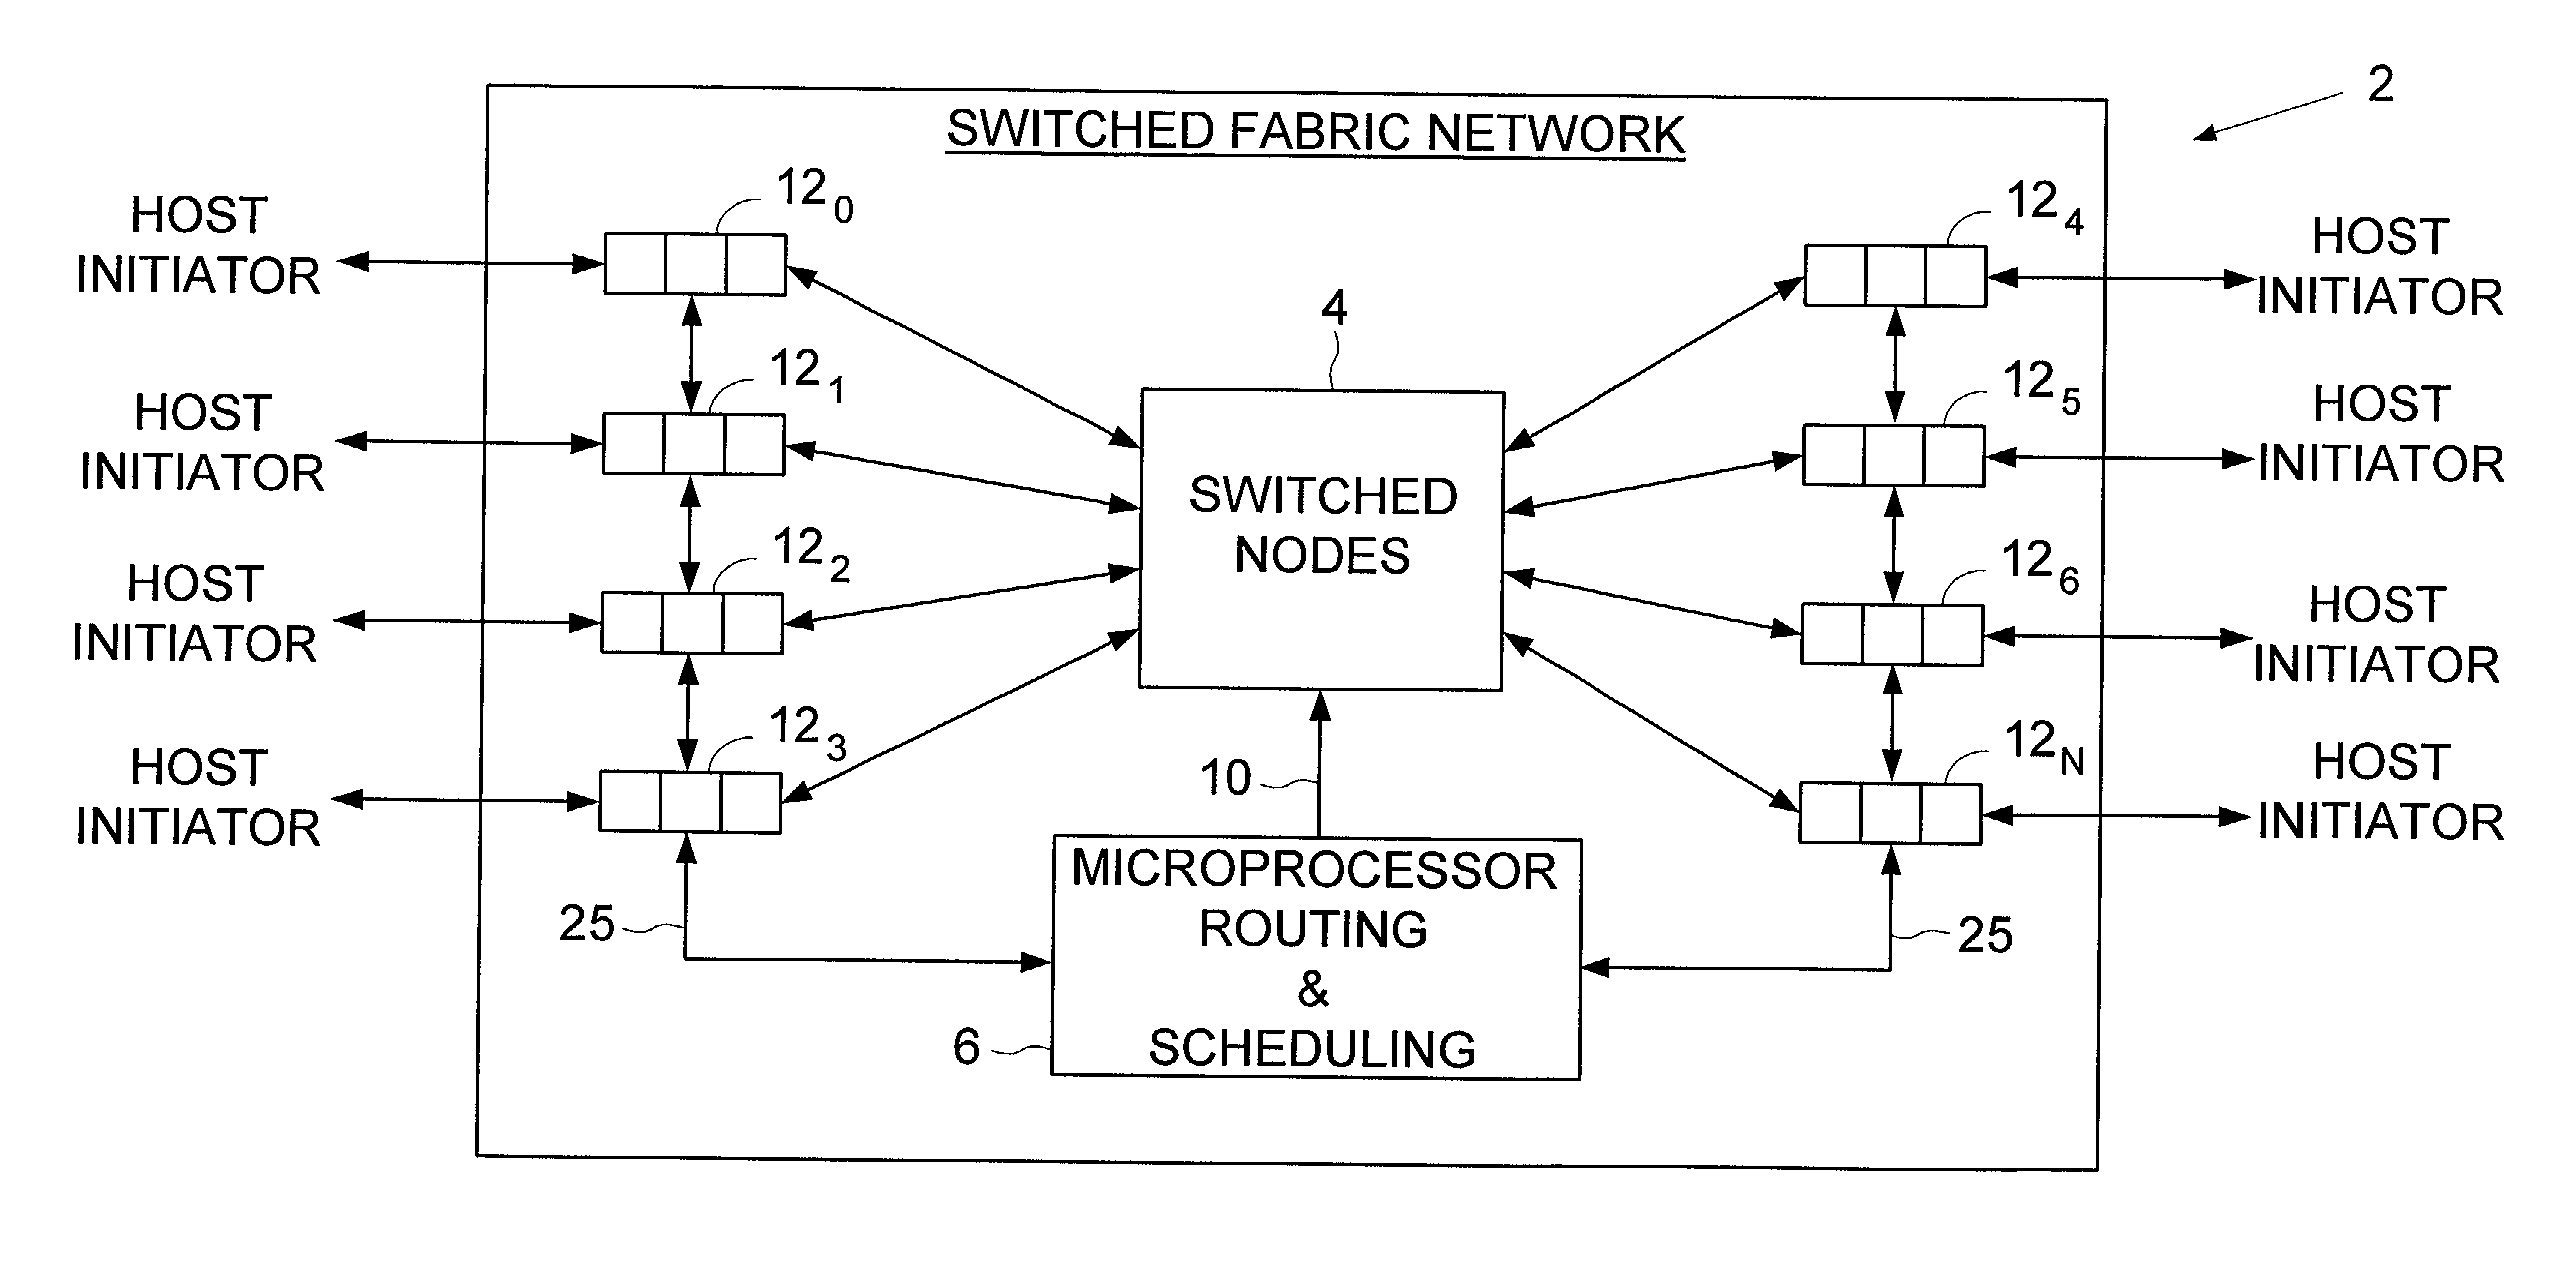 Isochronous switched fabric network